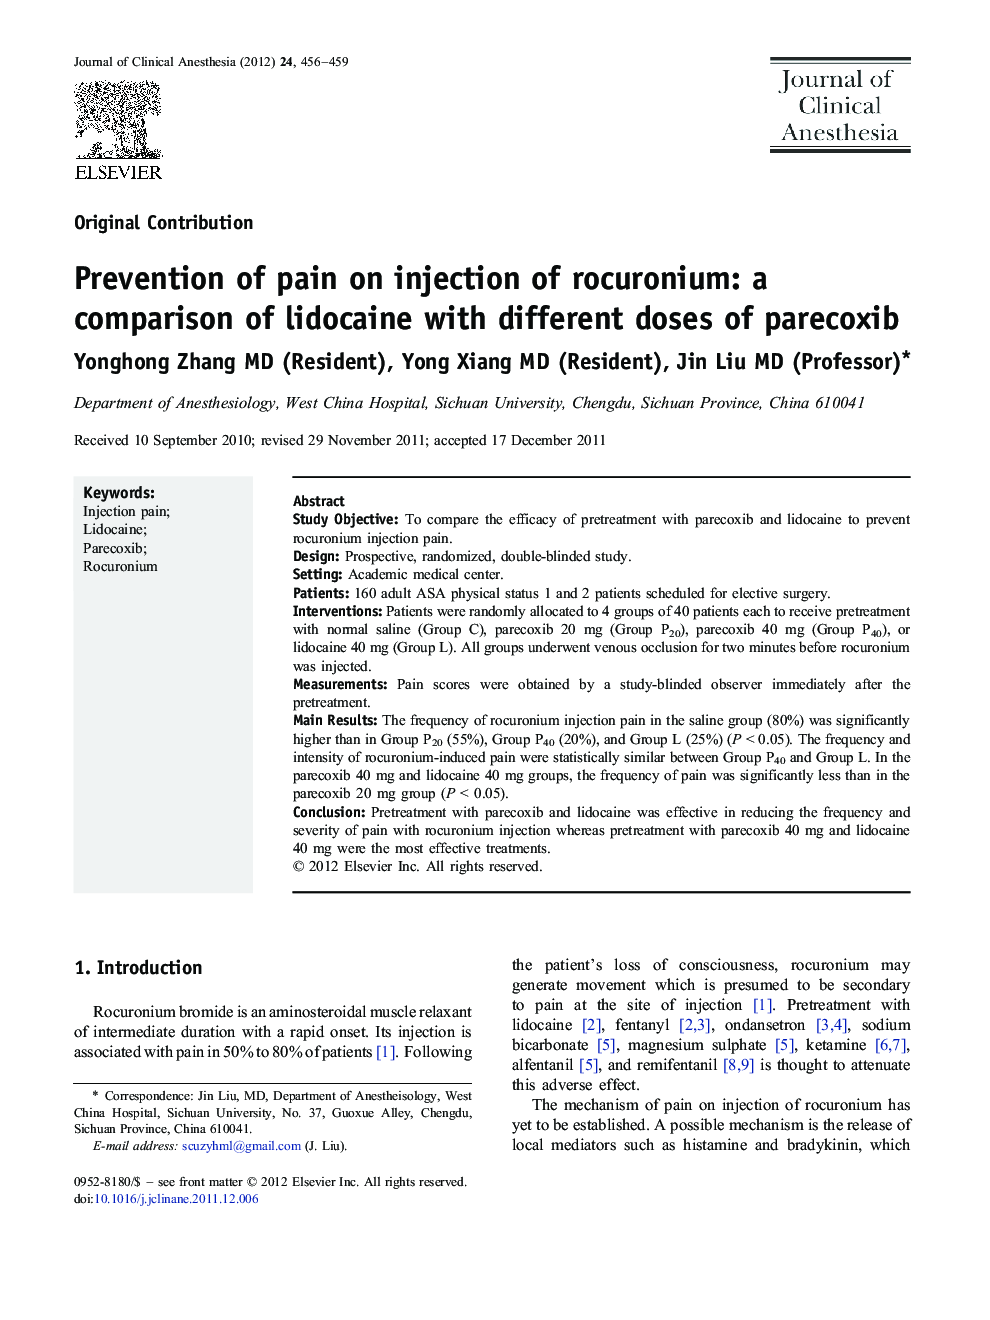 Prevention of pain on injection of rocuronium: a comparison of lidocaine with different doses of parecoxib